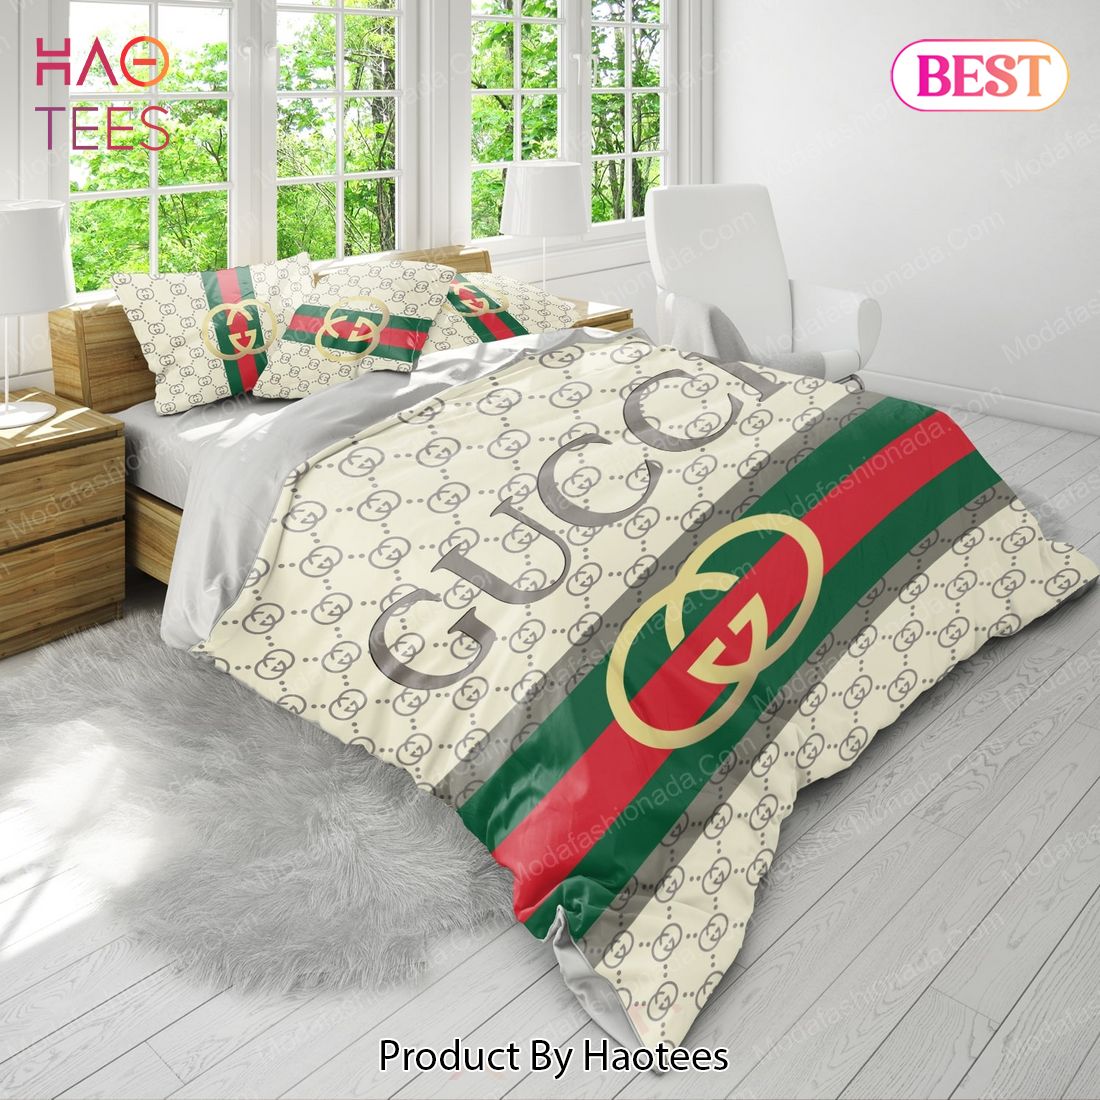 Complete Bedding Set - Duvet, Bedspread With Pillowcases - Gucci Inspired